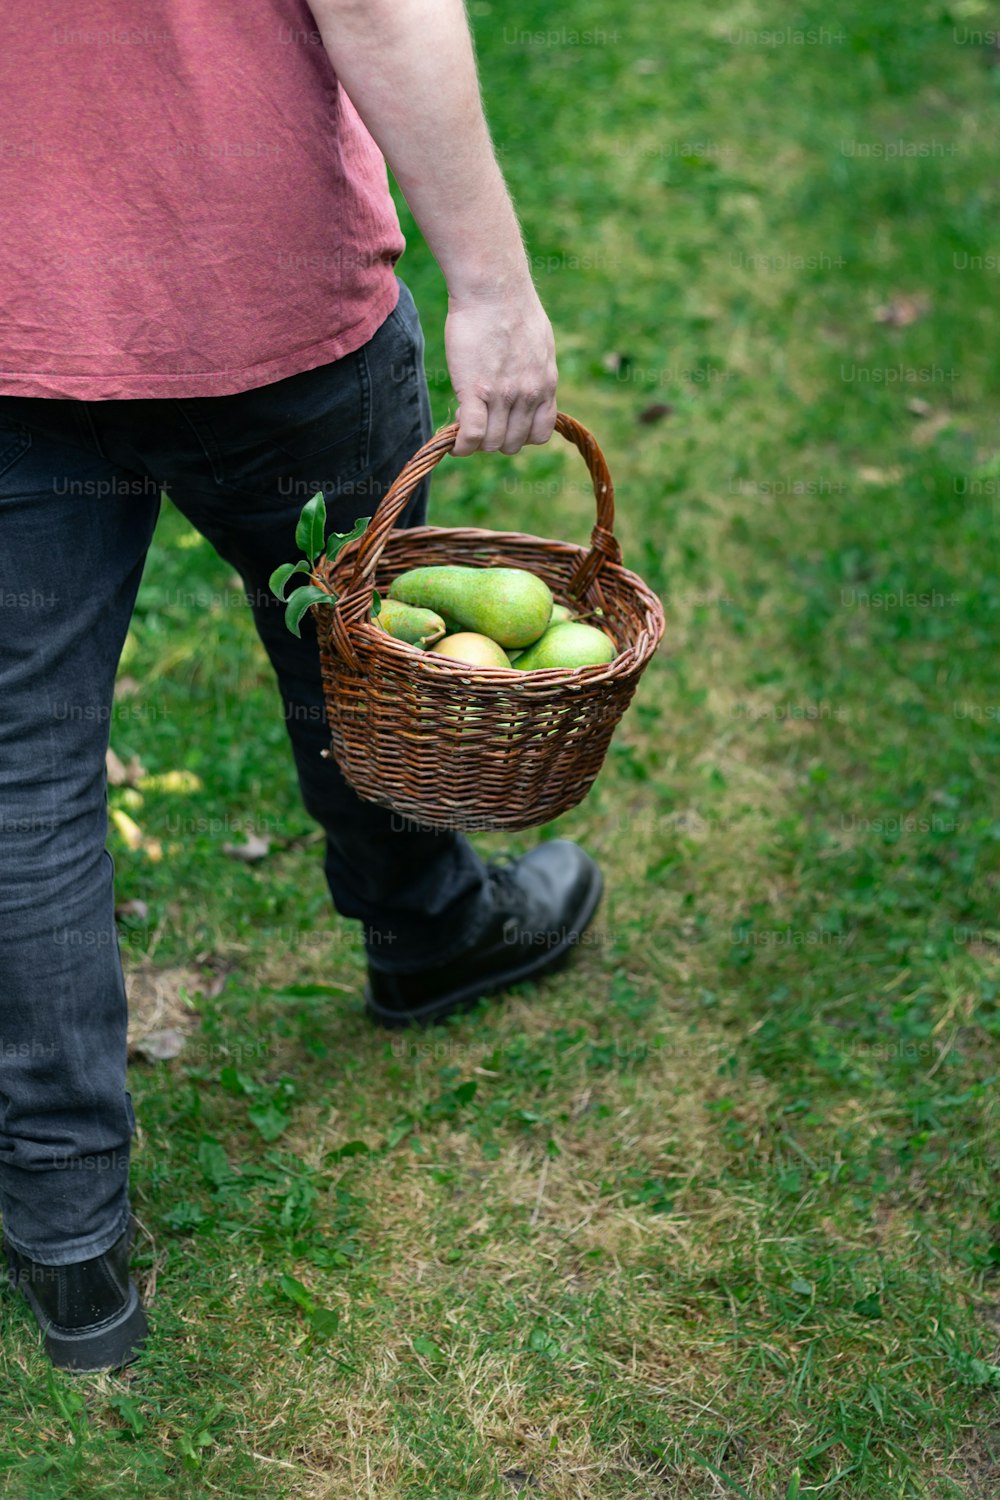 a person holding a basket of apples in a field